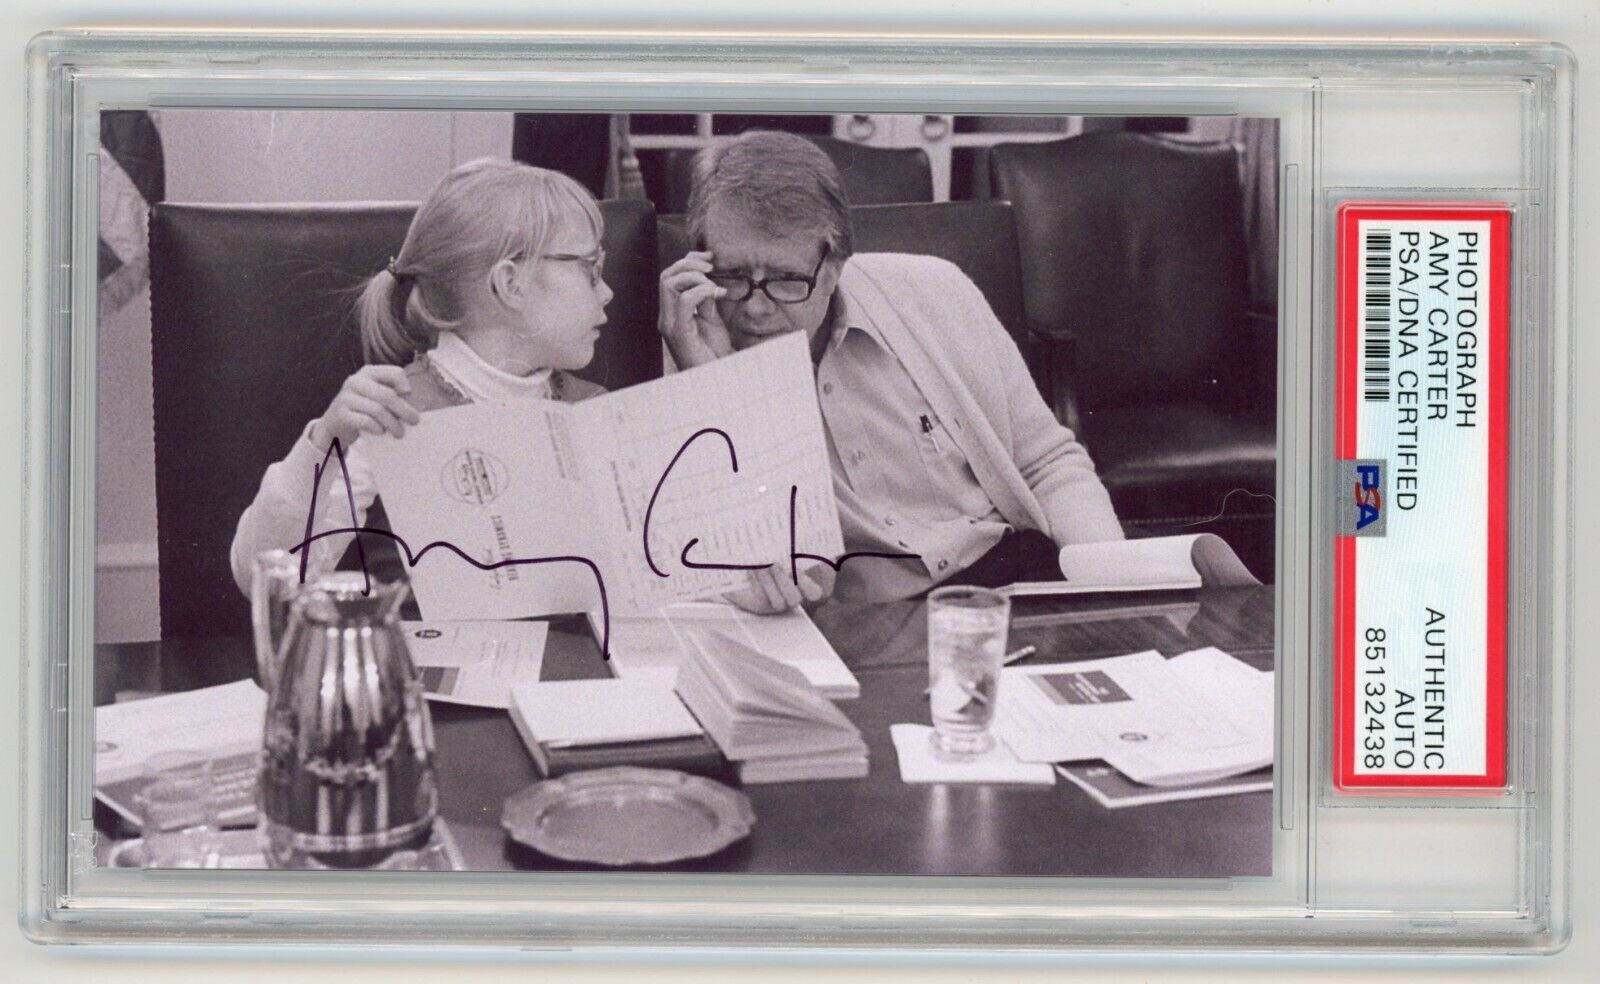 AMY CARTER Signed Photo w/ President White House - Daughter of Jimmy Carter -PSA